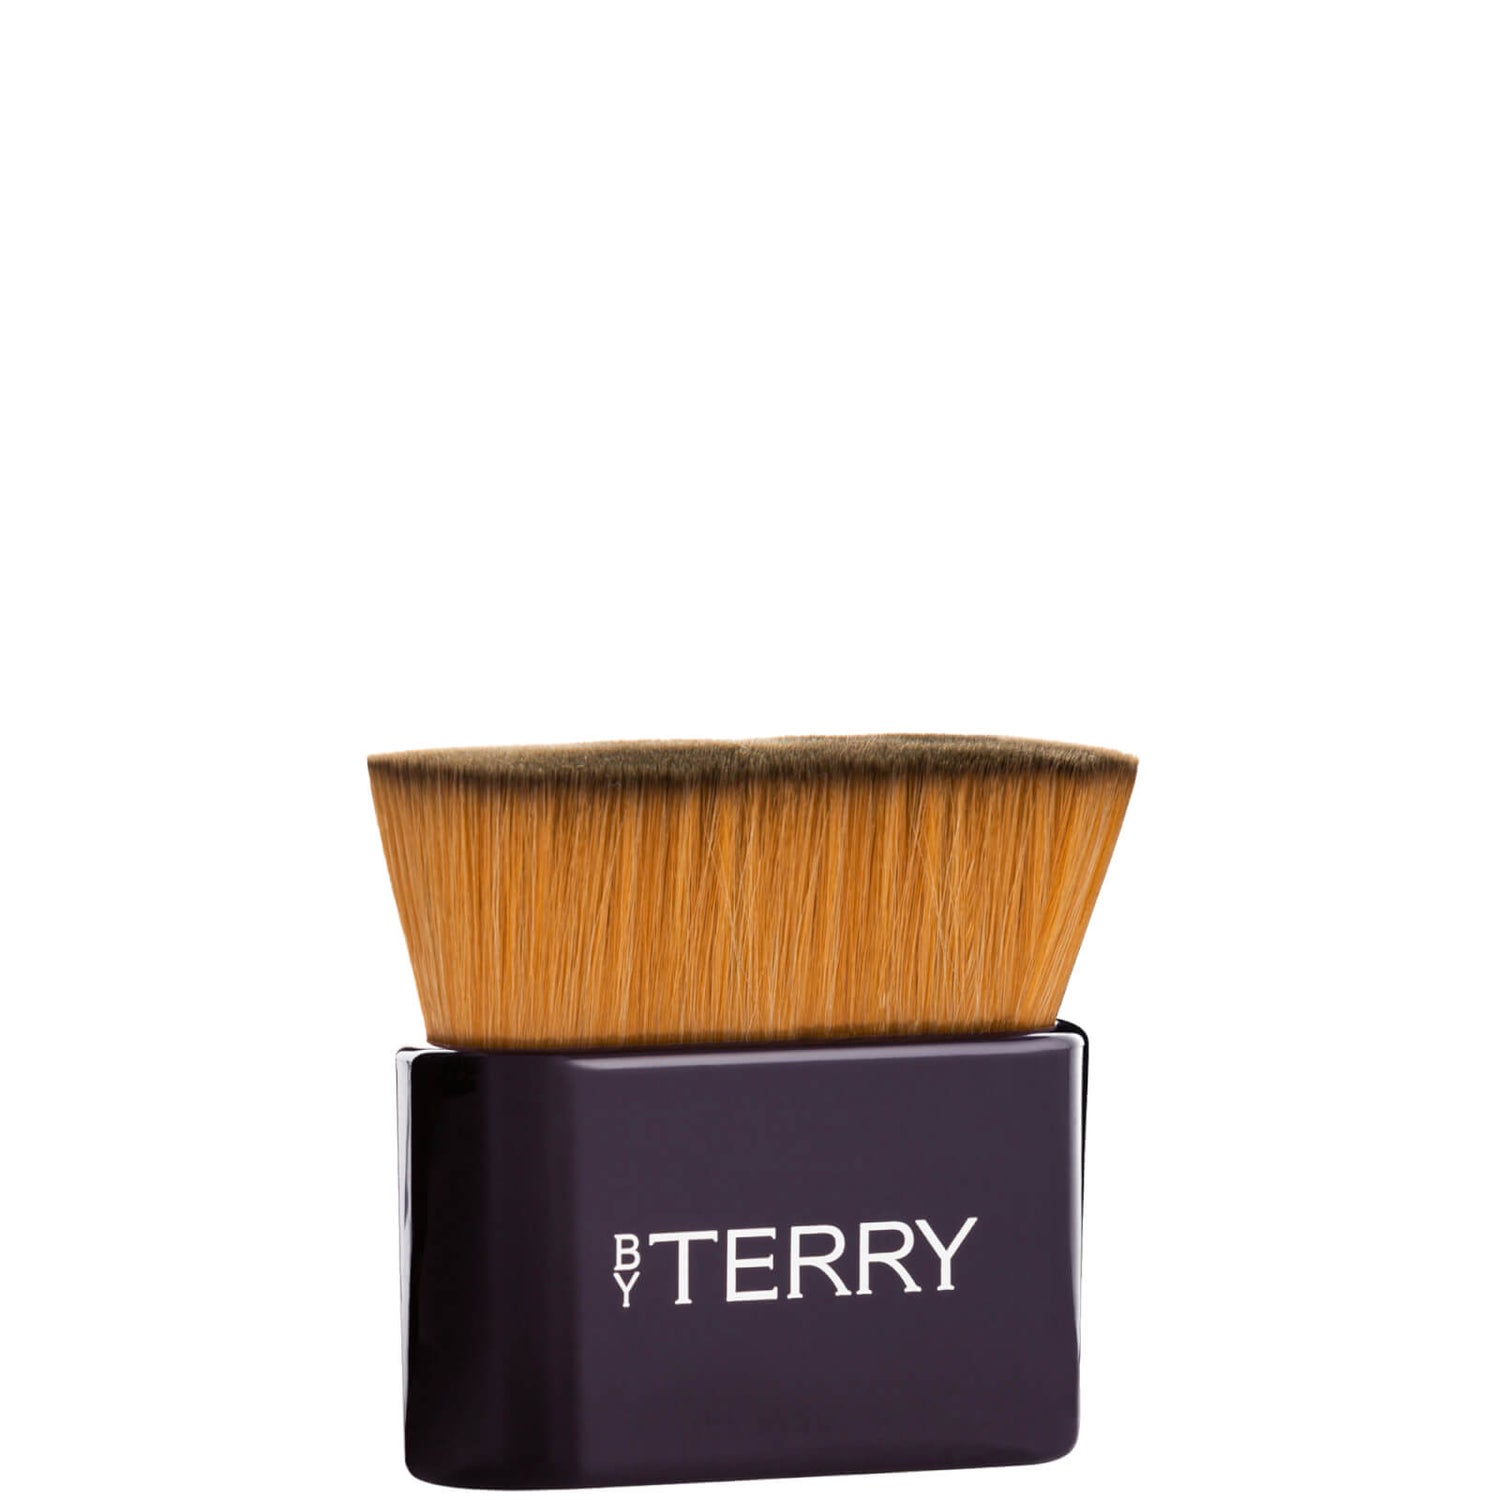 BY TERRY Tool Expert Brush Face Body 1 piece